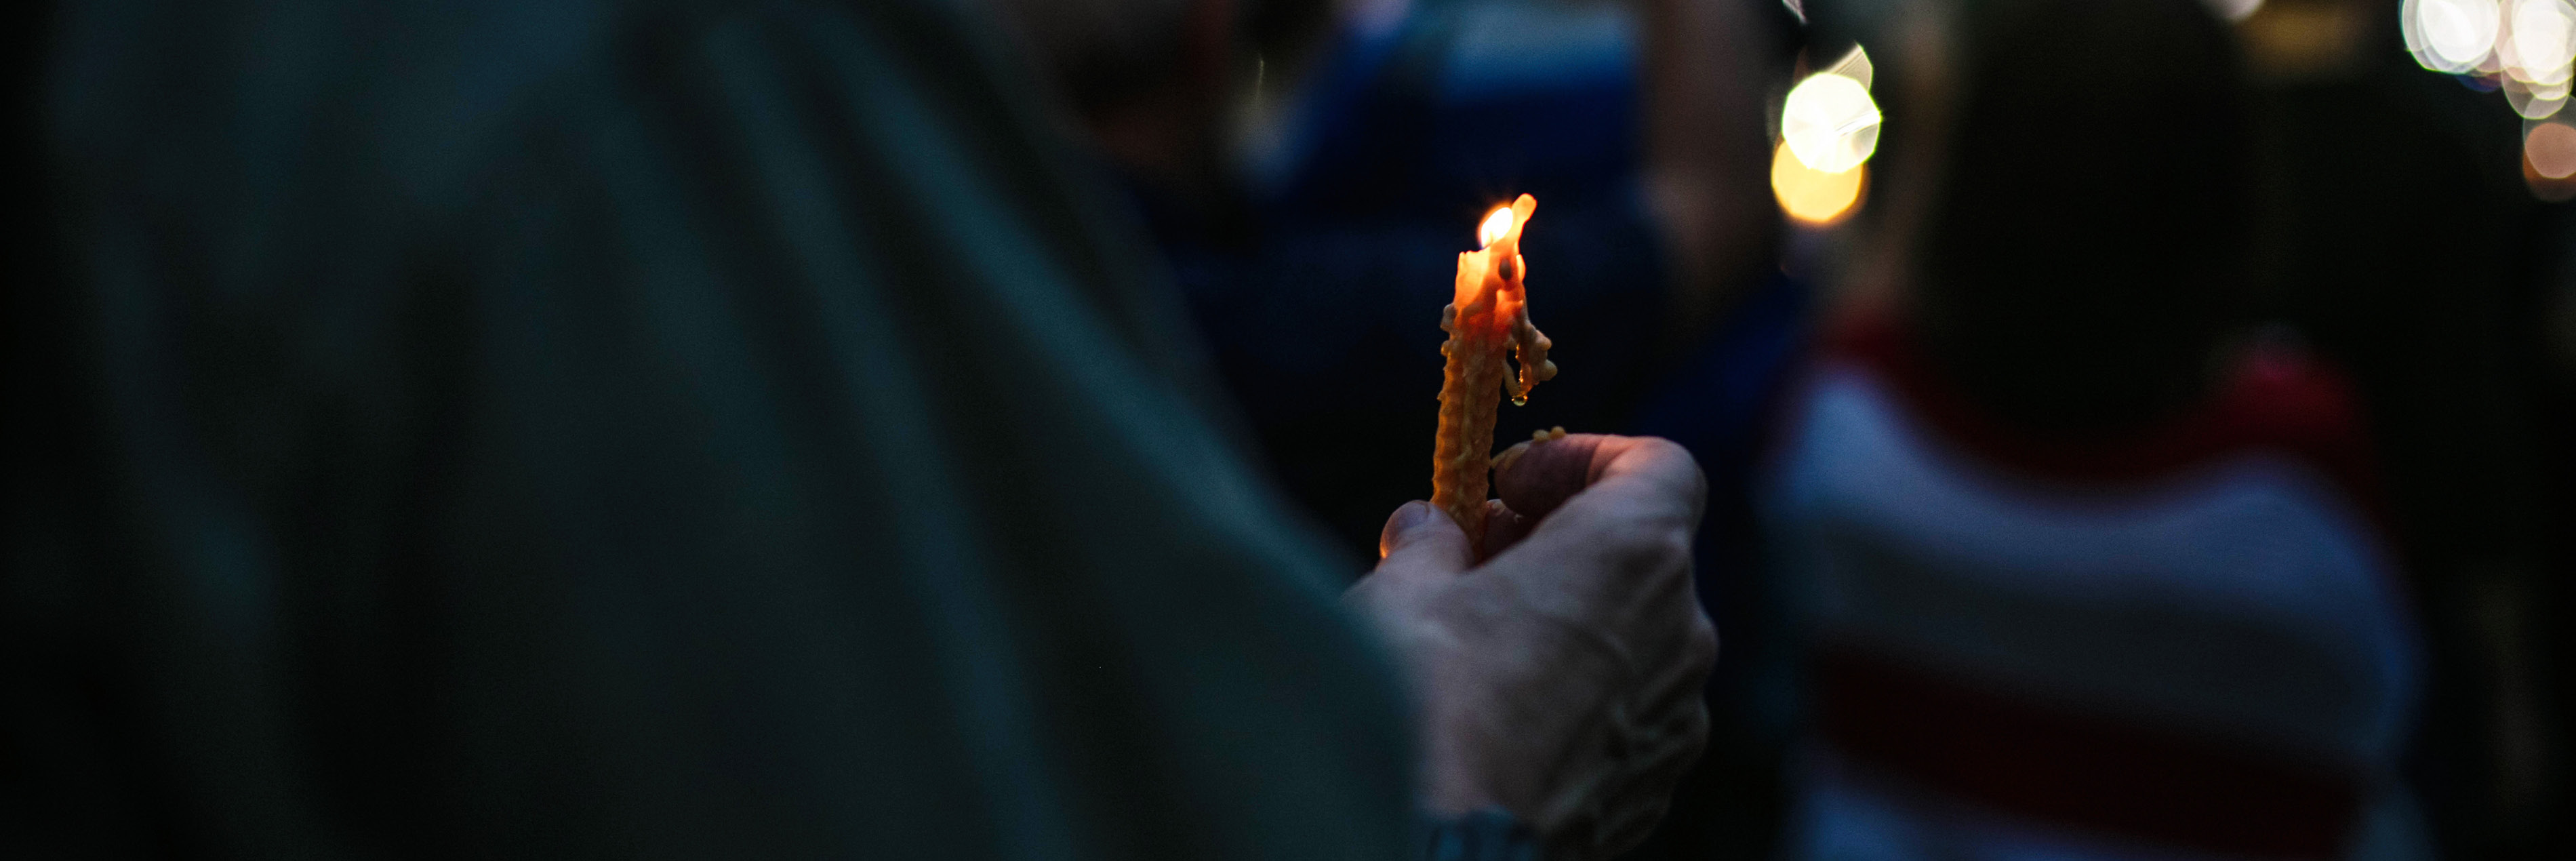 photo of person holding a candle